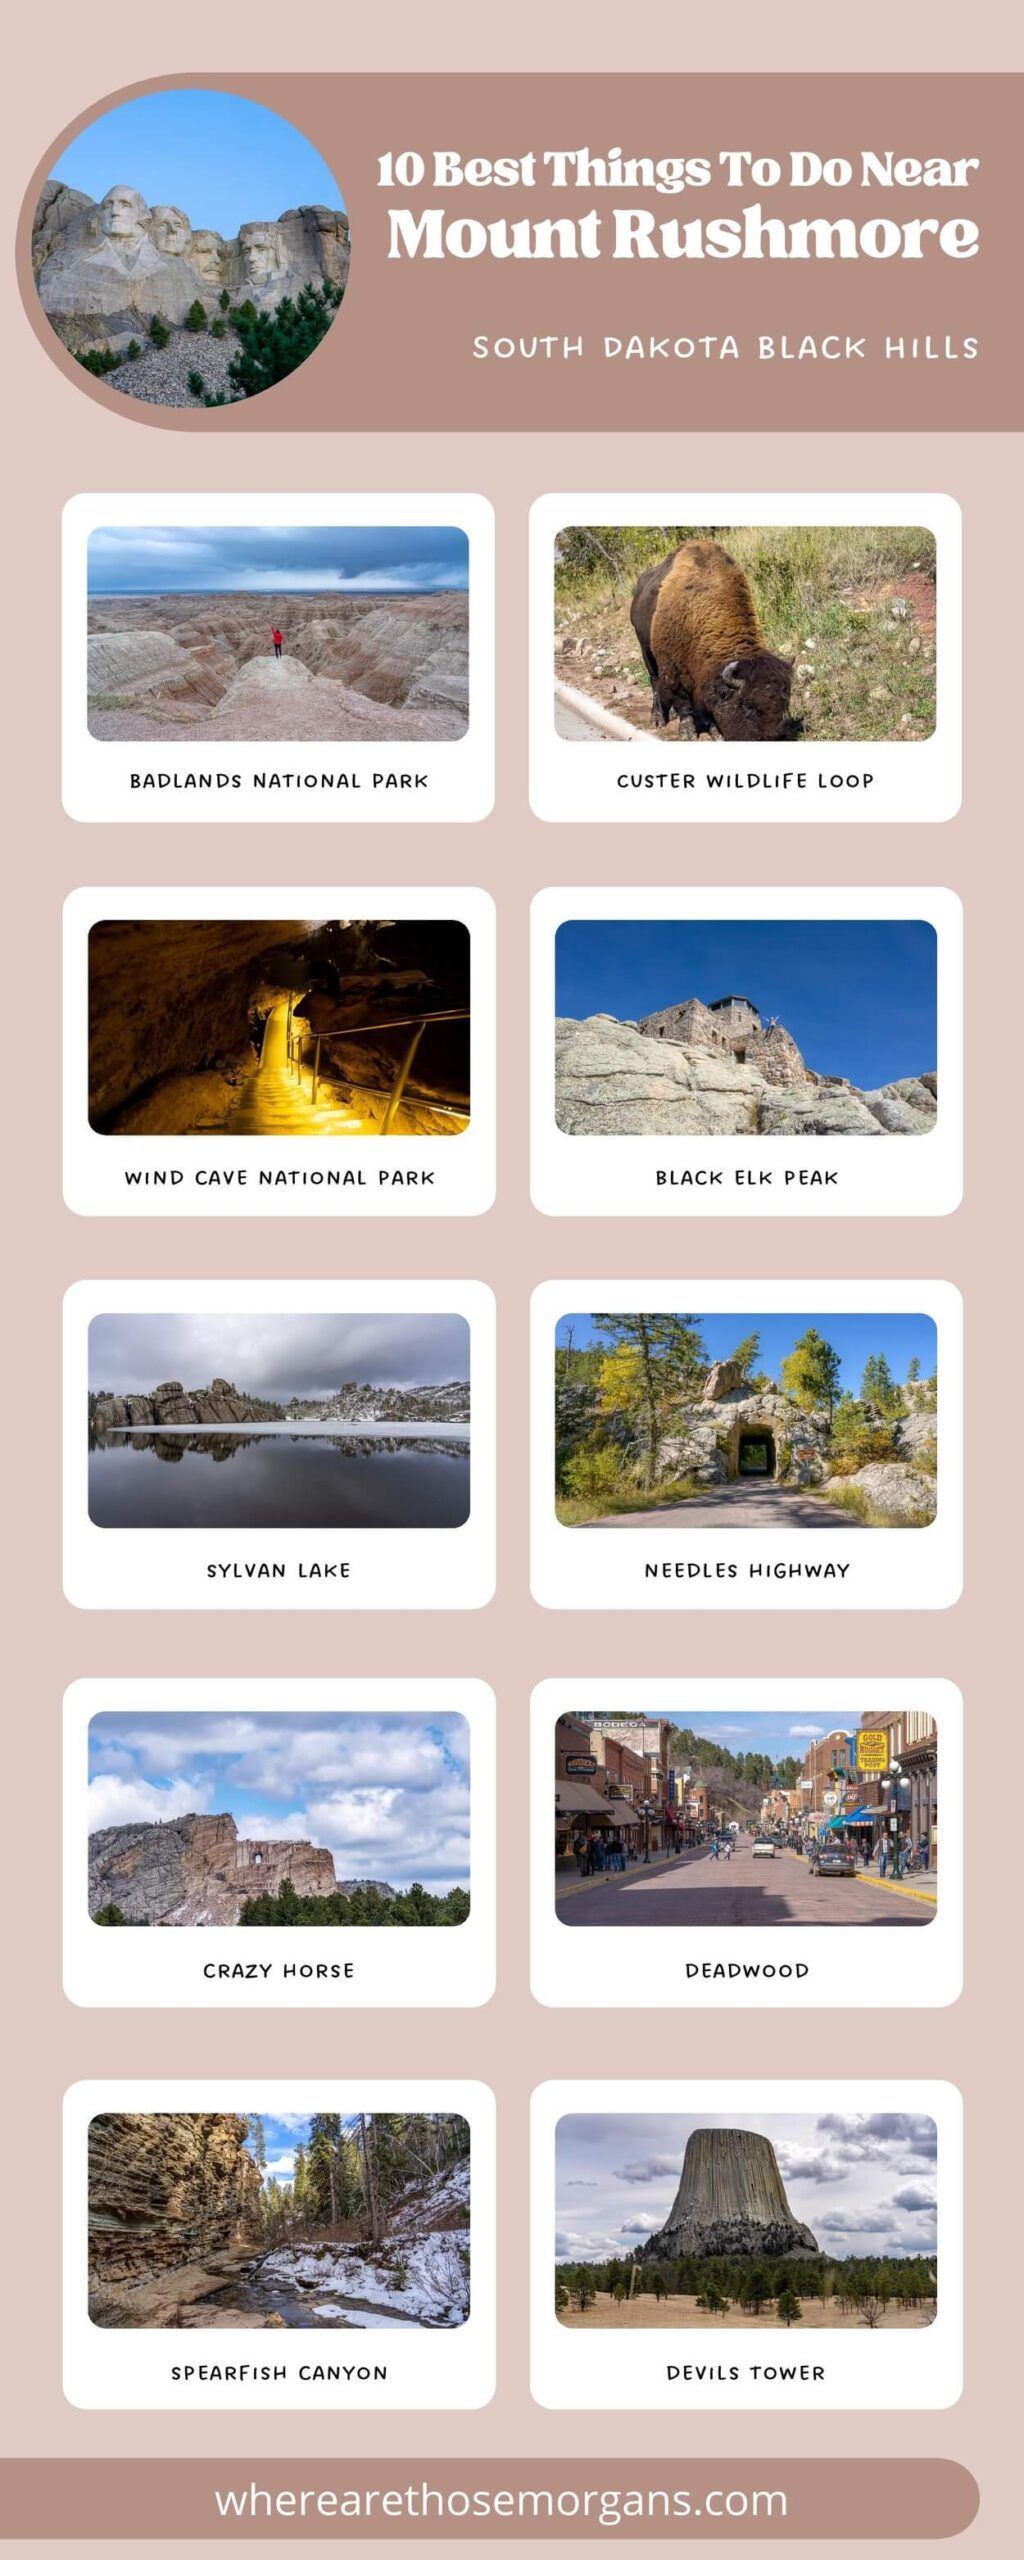 Infographic by Where Are Those Morgans showing the 10 best things to do near Mount Rushmore National Memorial in South Dakota's Black Hills